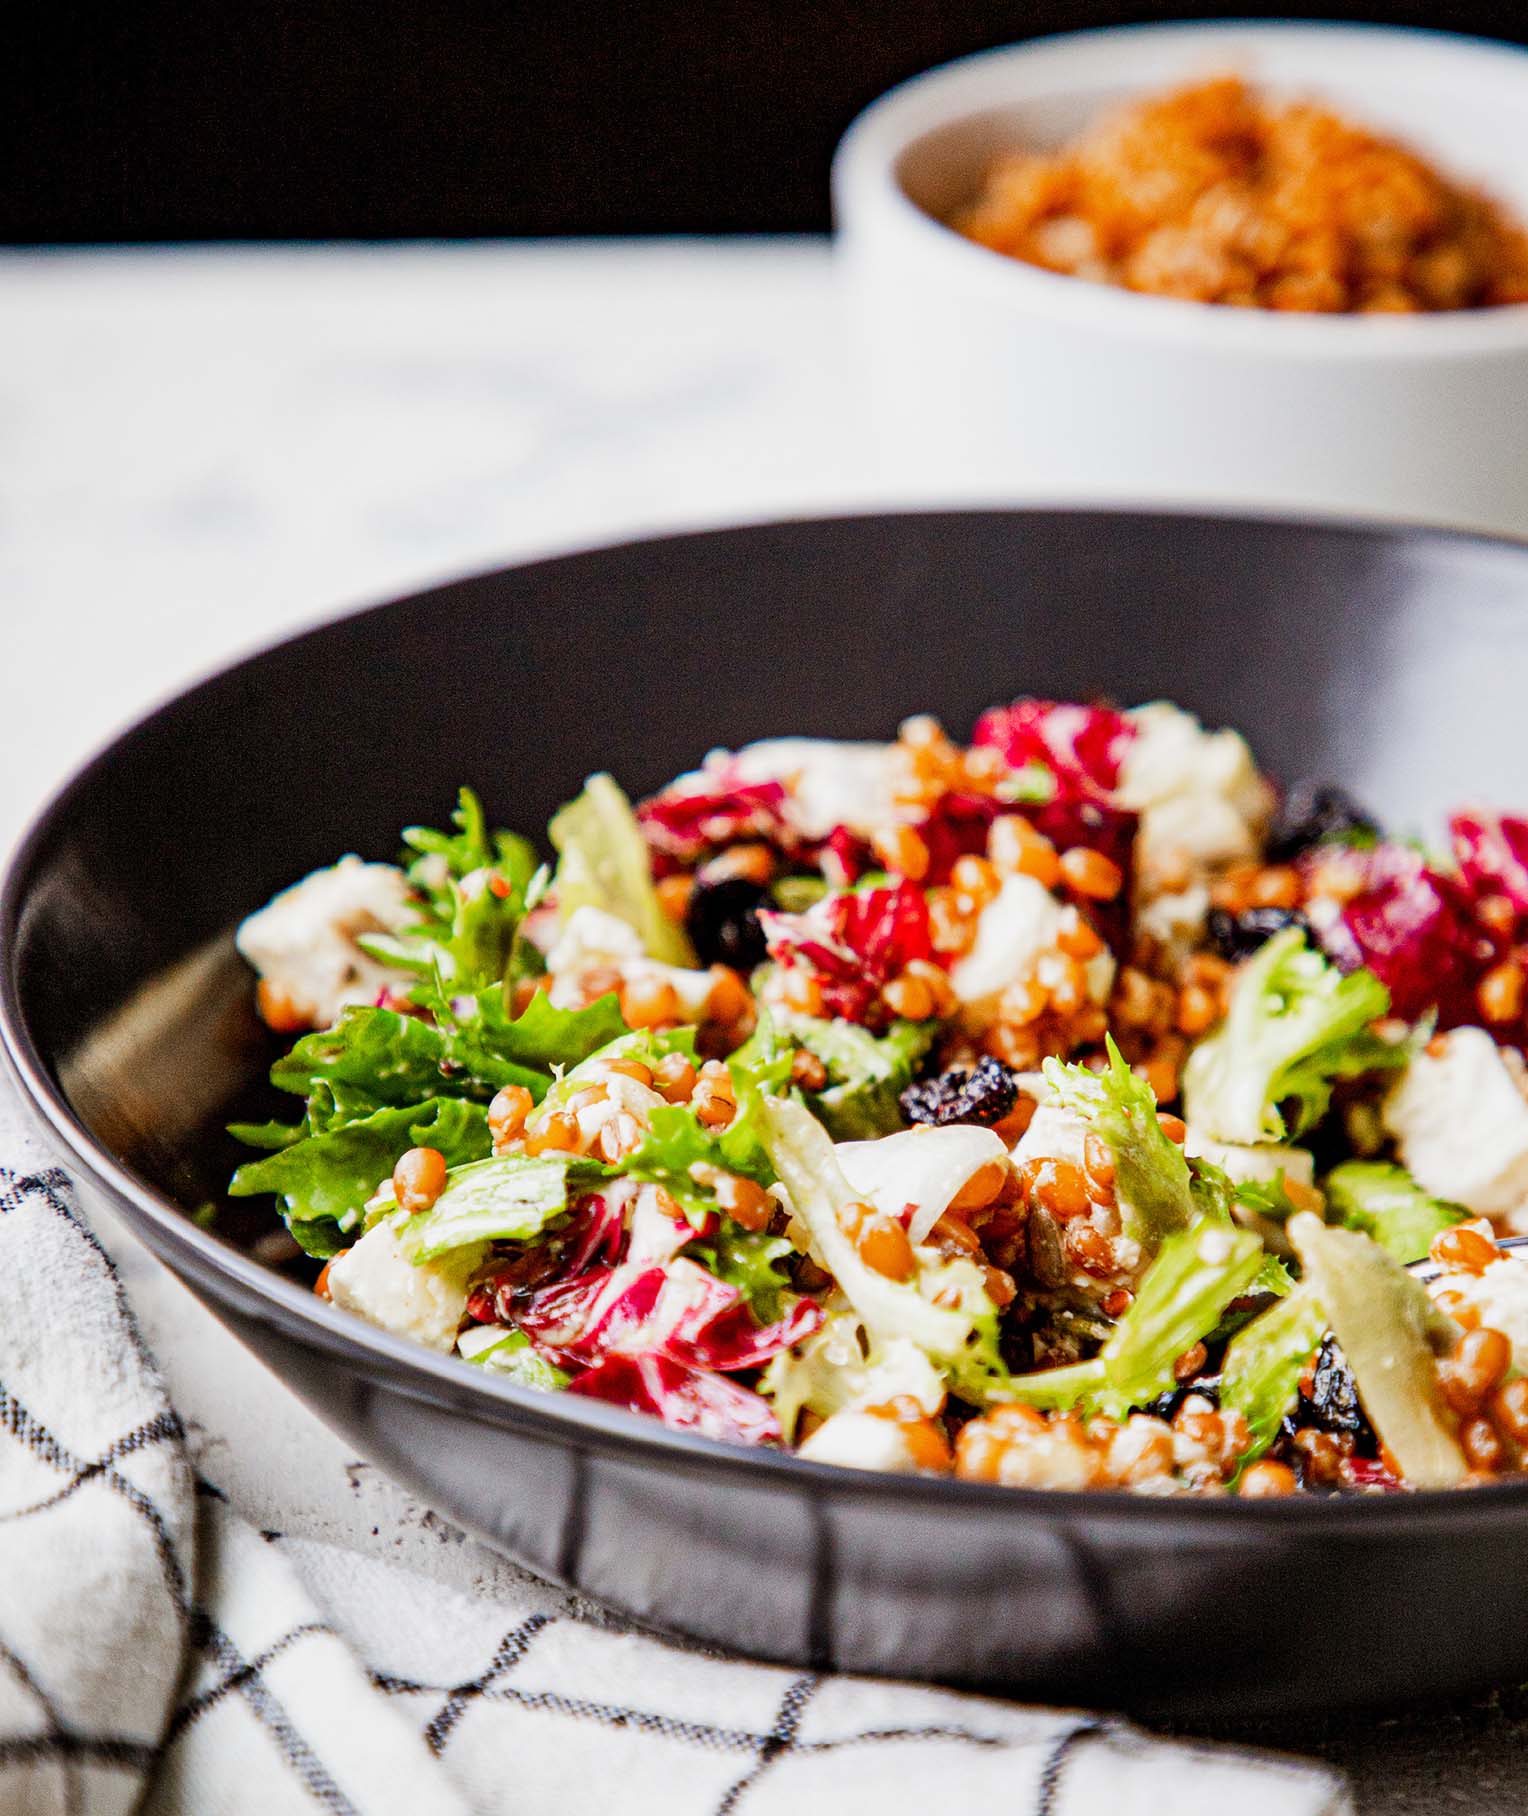 Wheat Berry Salad with Feta and Cherries